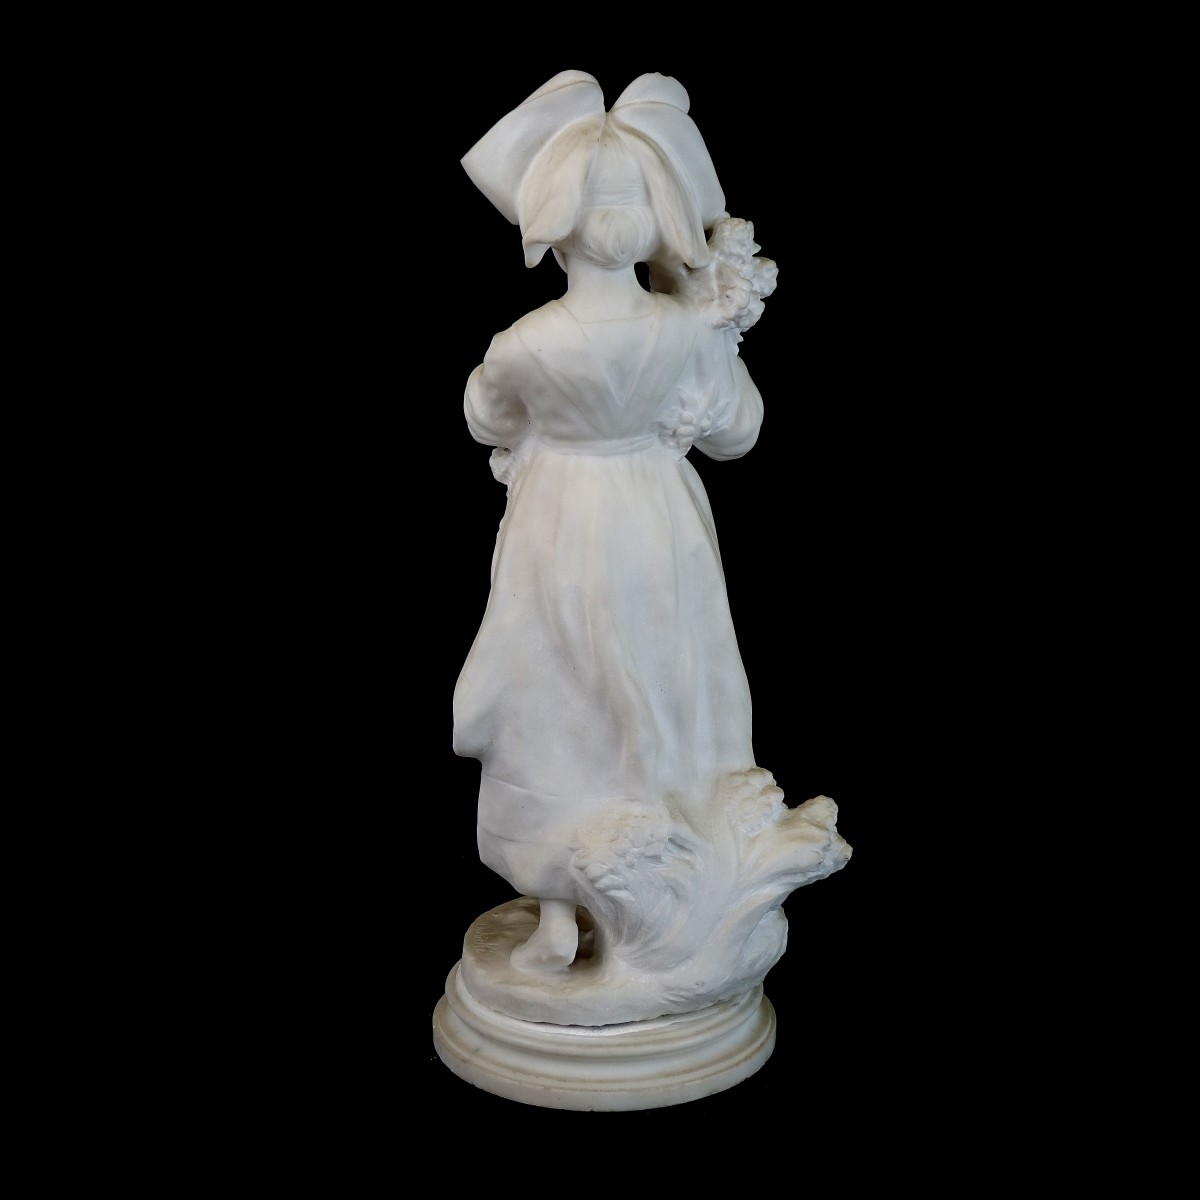 20th C. French Alabaster Sculpture